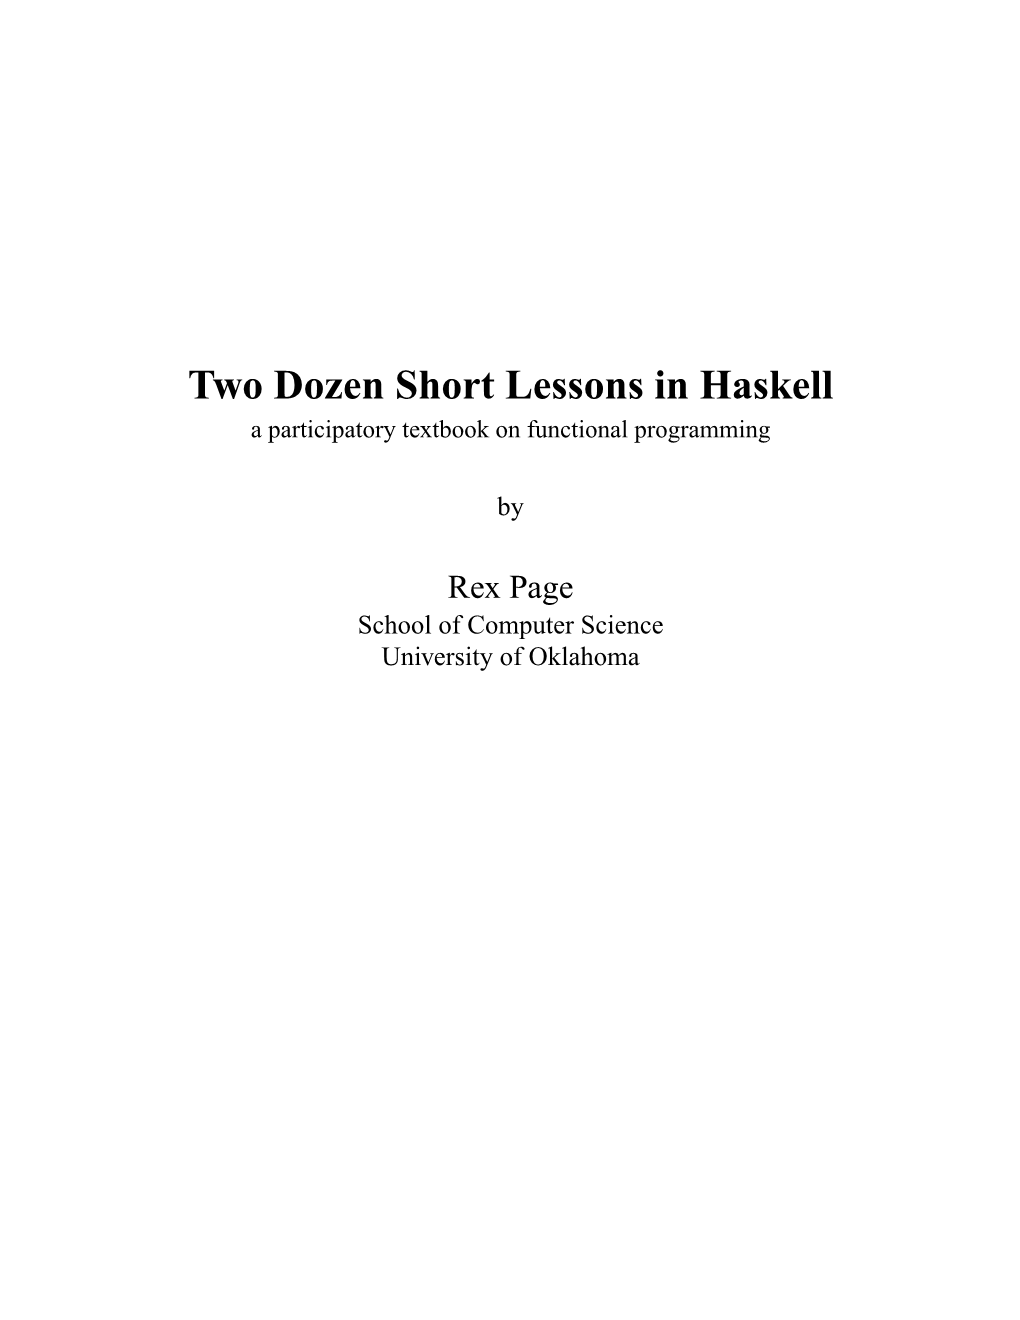 Two Dozen Short Lessons in Haskell a Participatory Textbook on Functional Programming